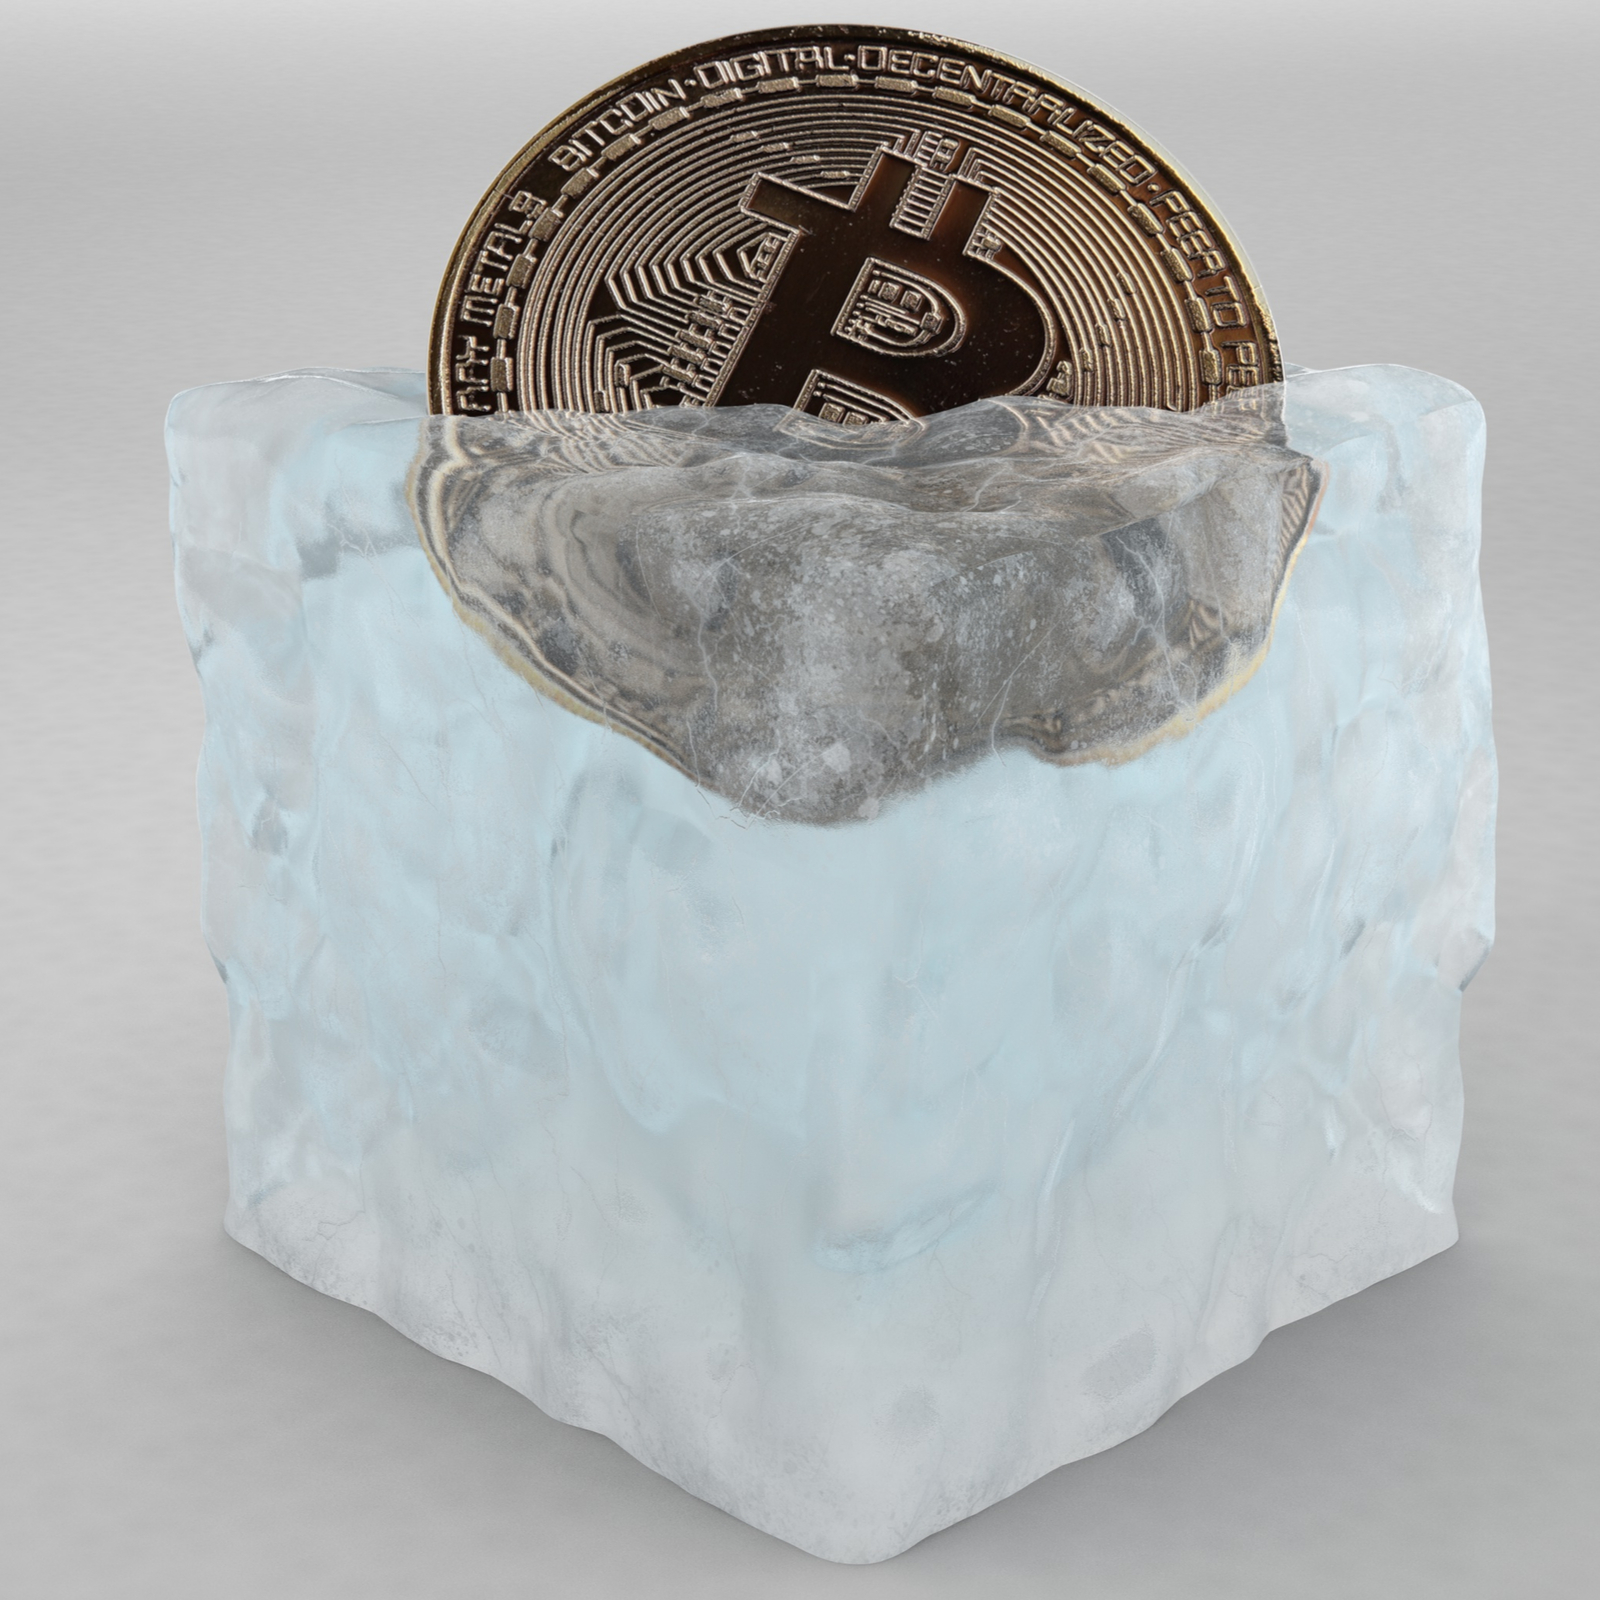 Bitcoin in Brief Monday: Poloniex Responds to Frozen Accounts Complaints